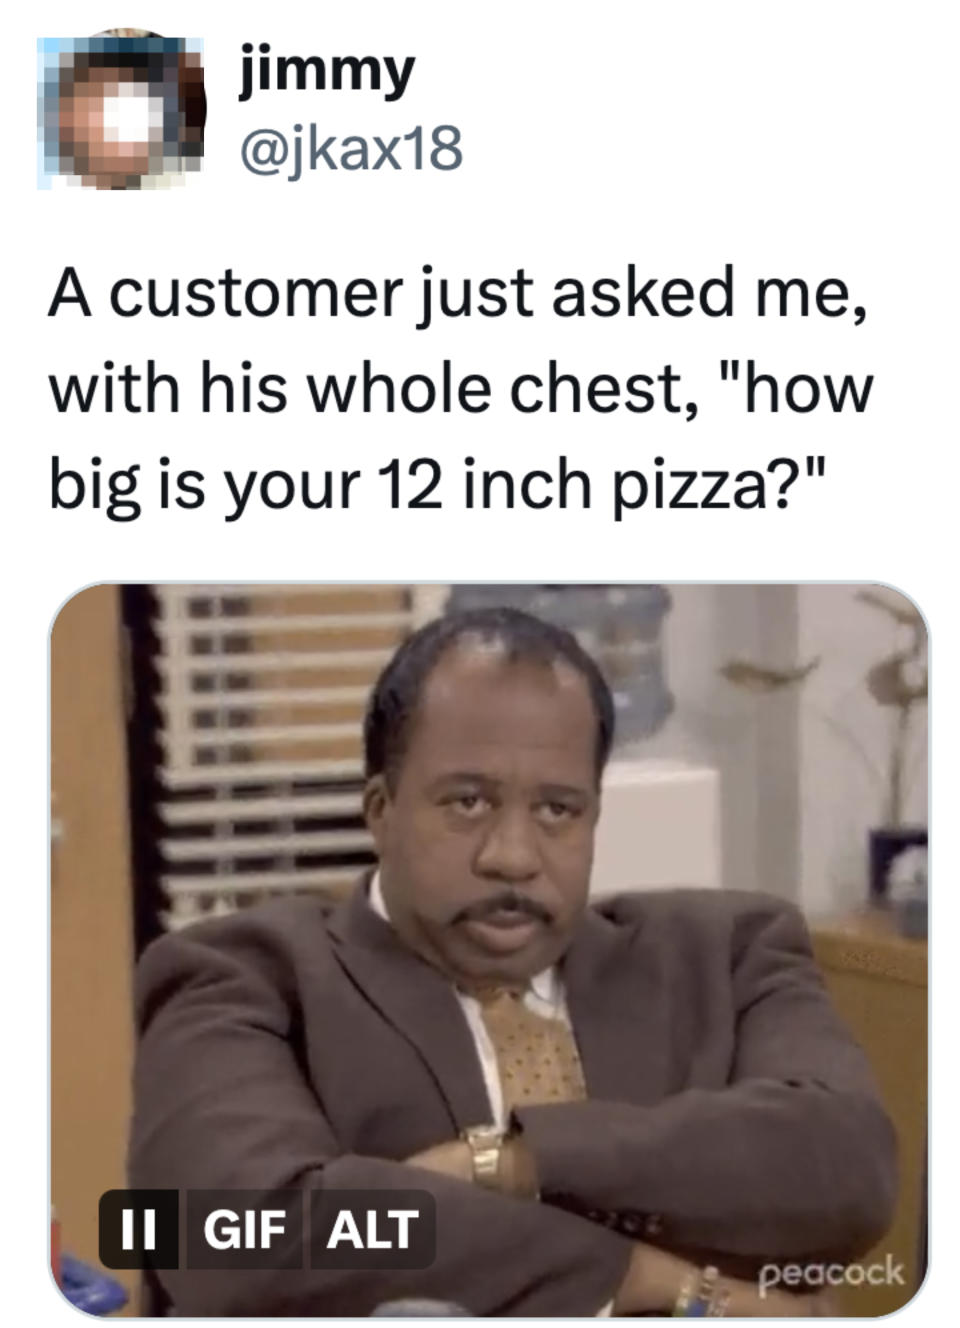 Meme with a man giving a disbelieving look in response to a question about the size of a 12-inch pizza